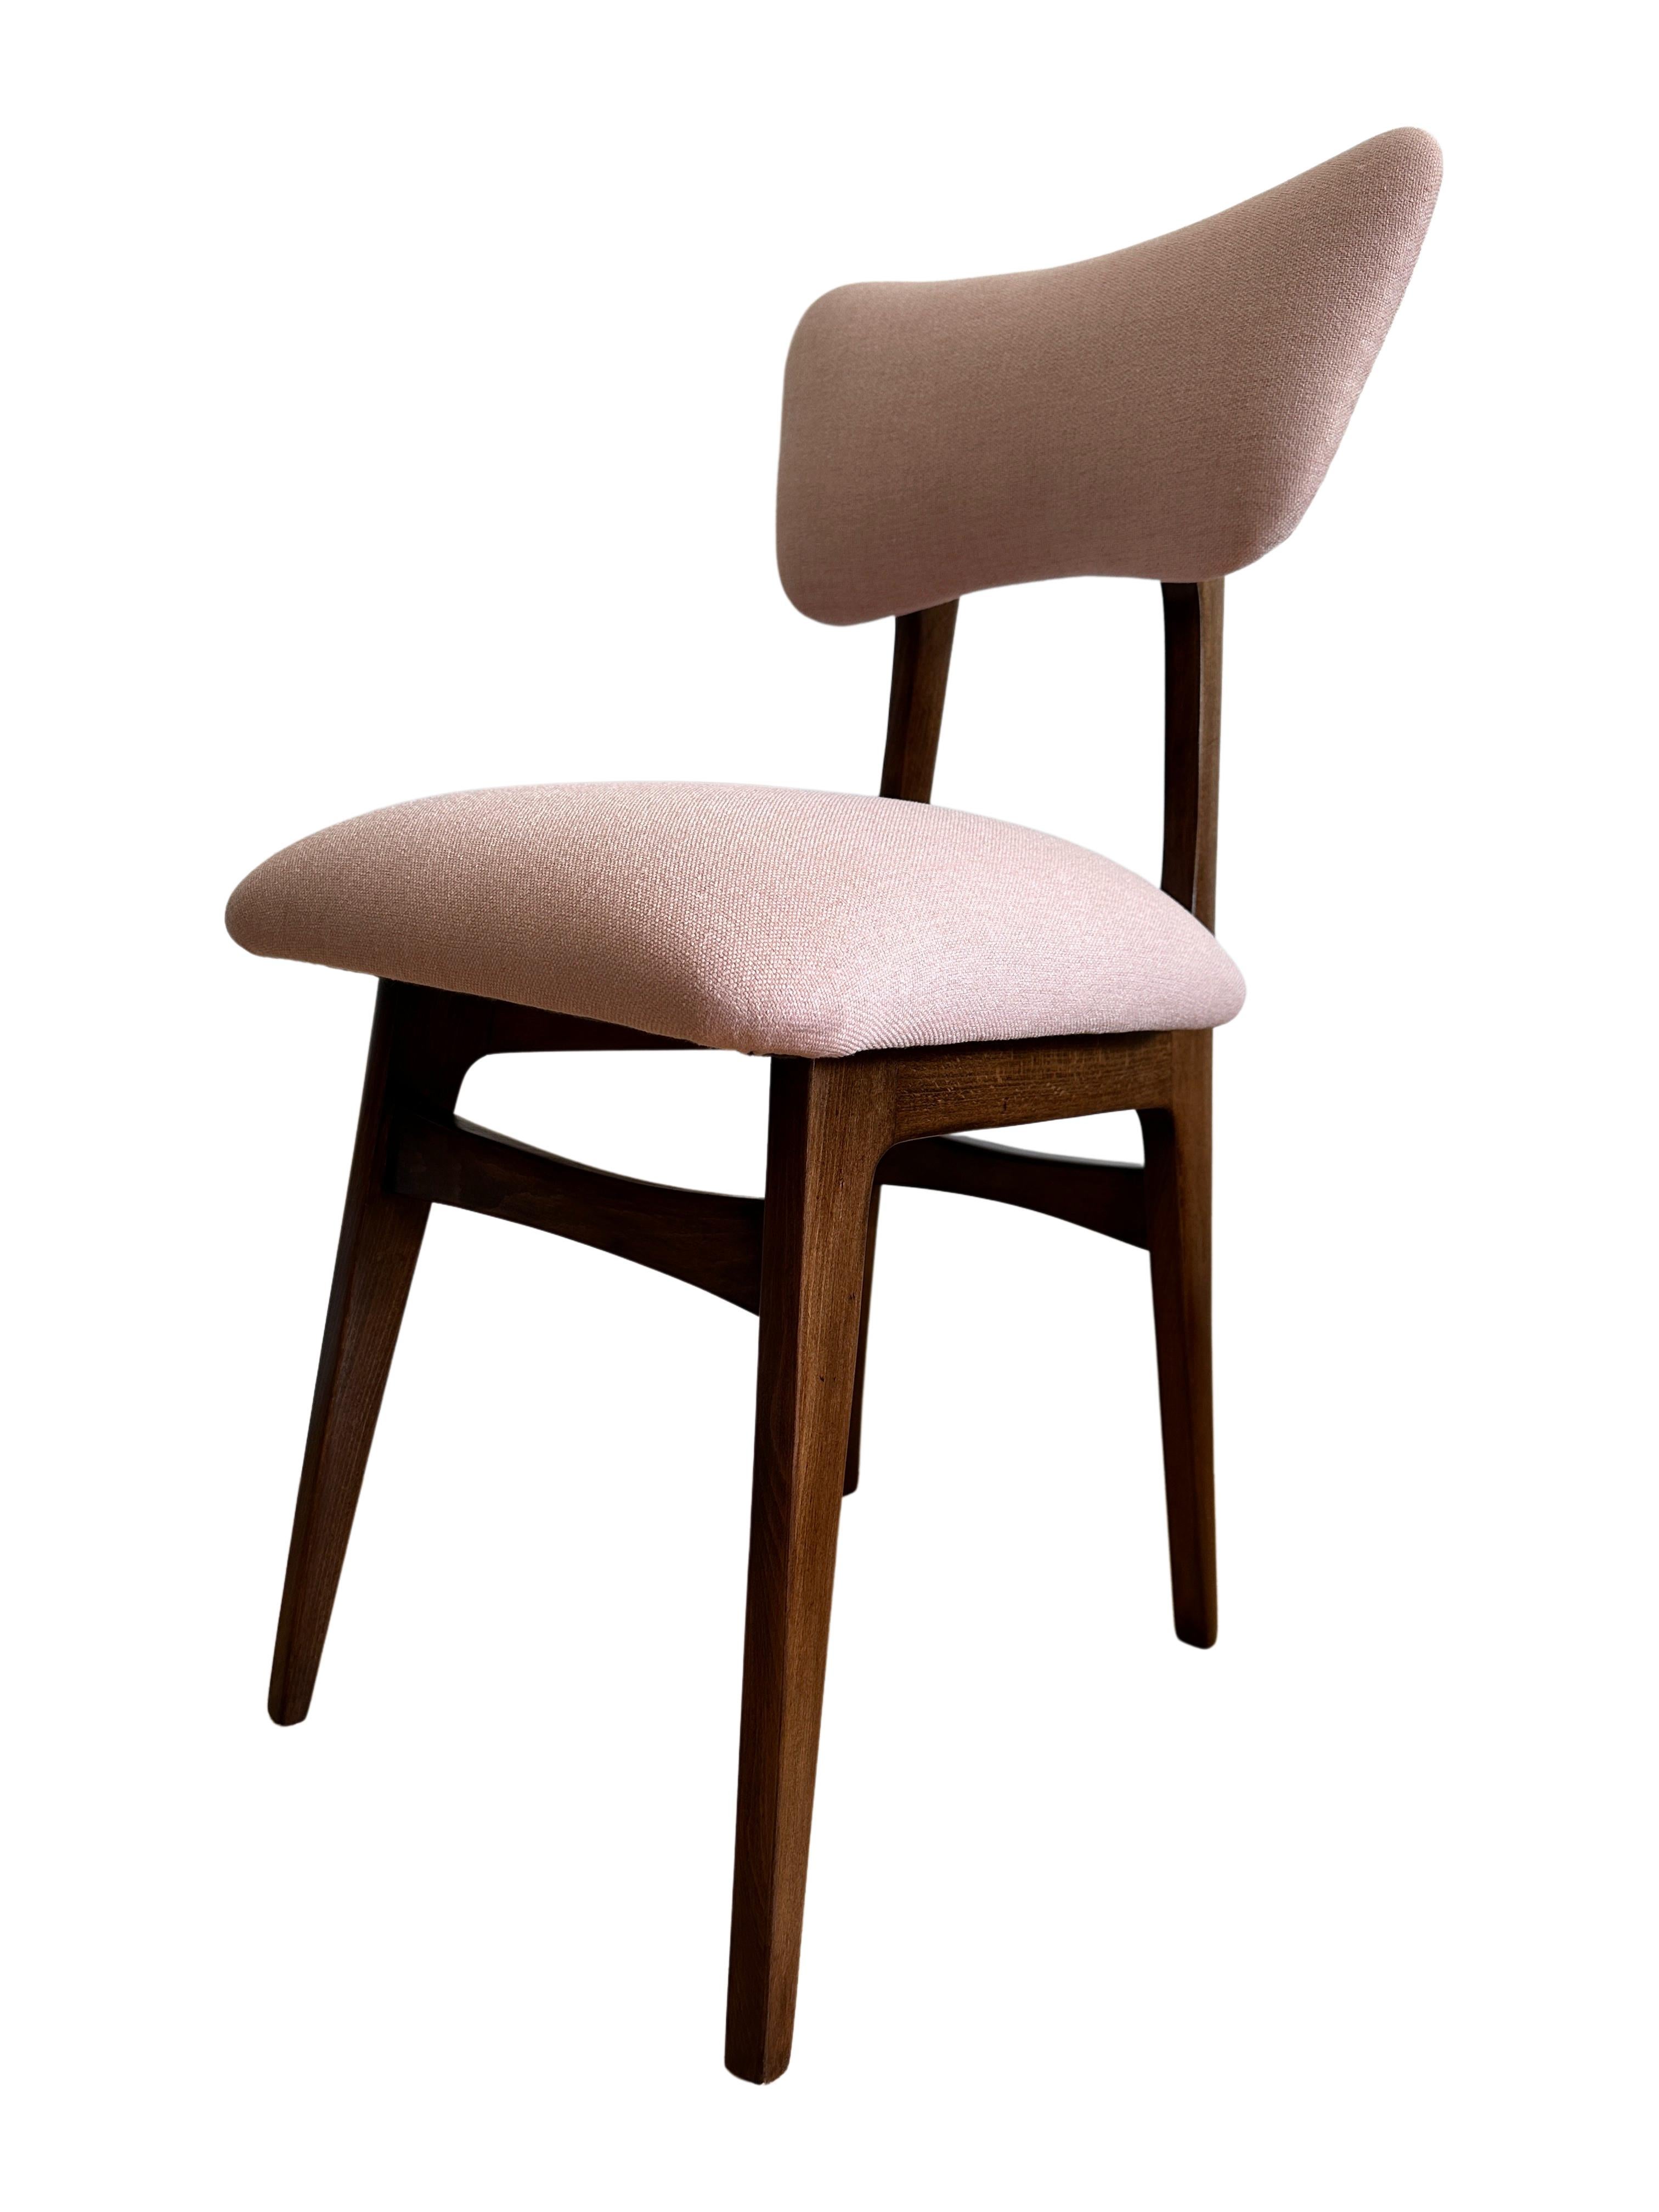 Polish Midcentury Wooden Dining Chair in Light Pink Upholstery, Europe, 1960s For Sale